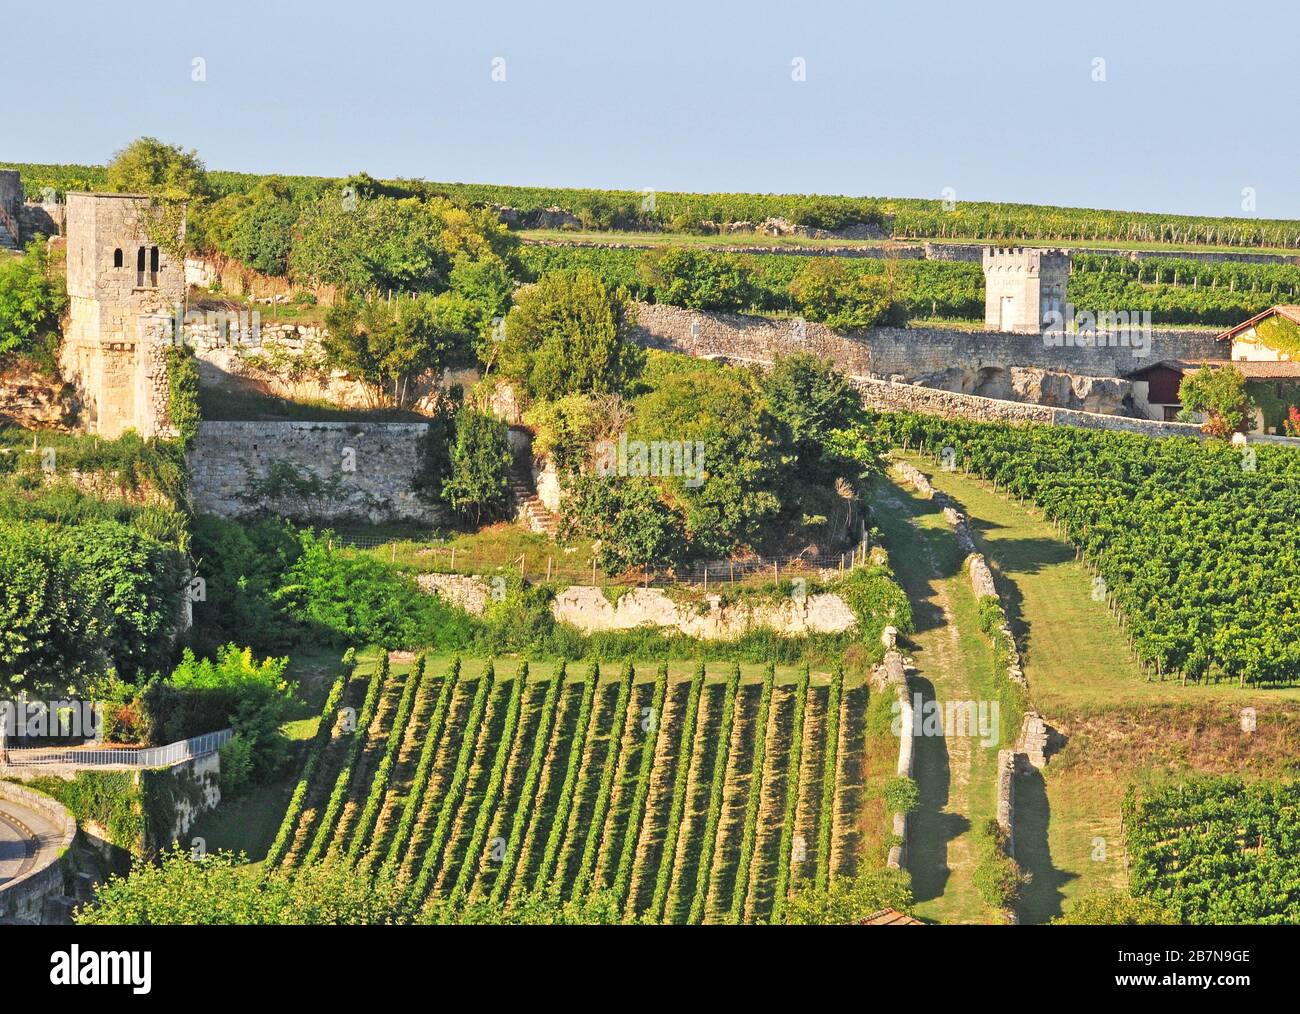 vineyards in the city of Saint-Emilion, Gironde, Nouvelle Aquitaine, France Stock Photo